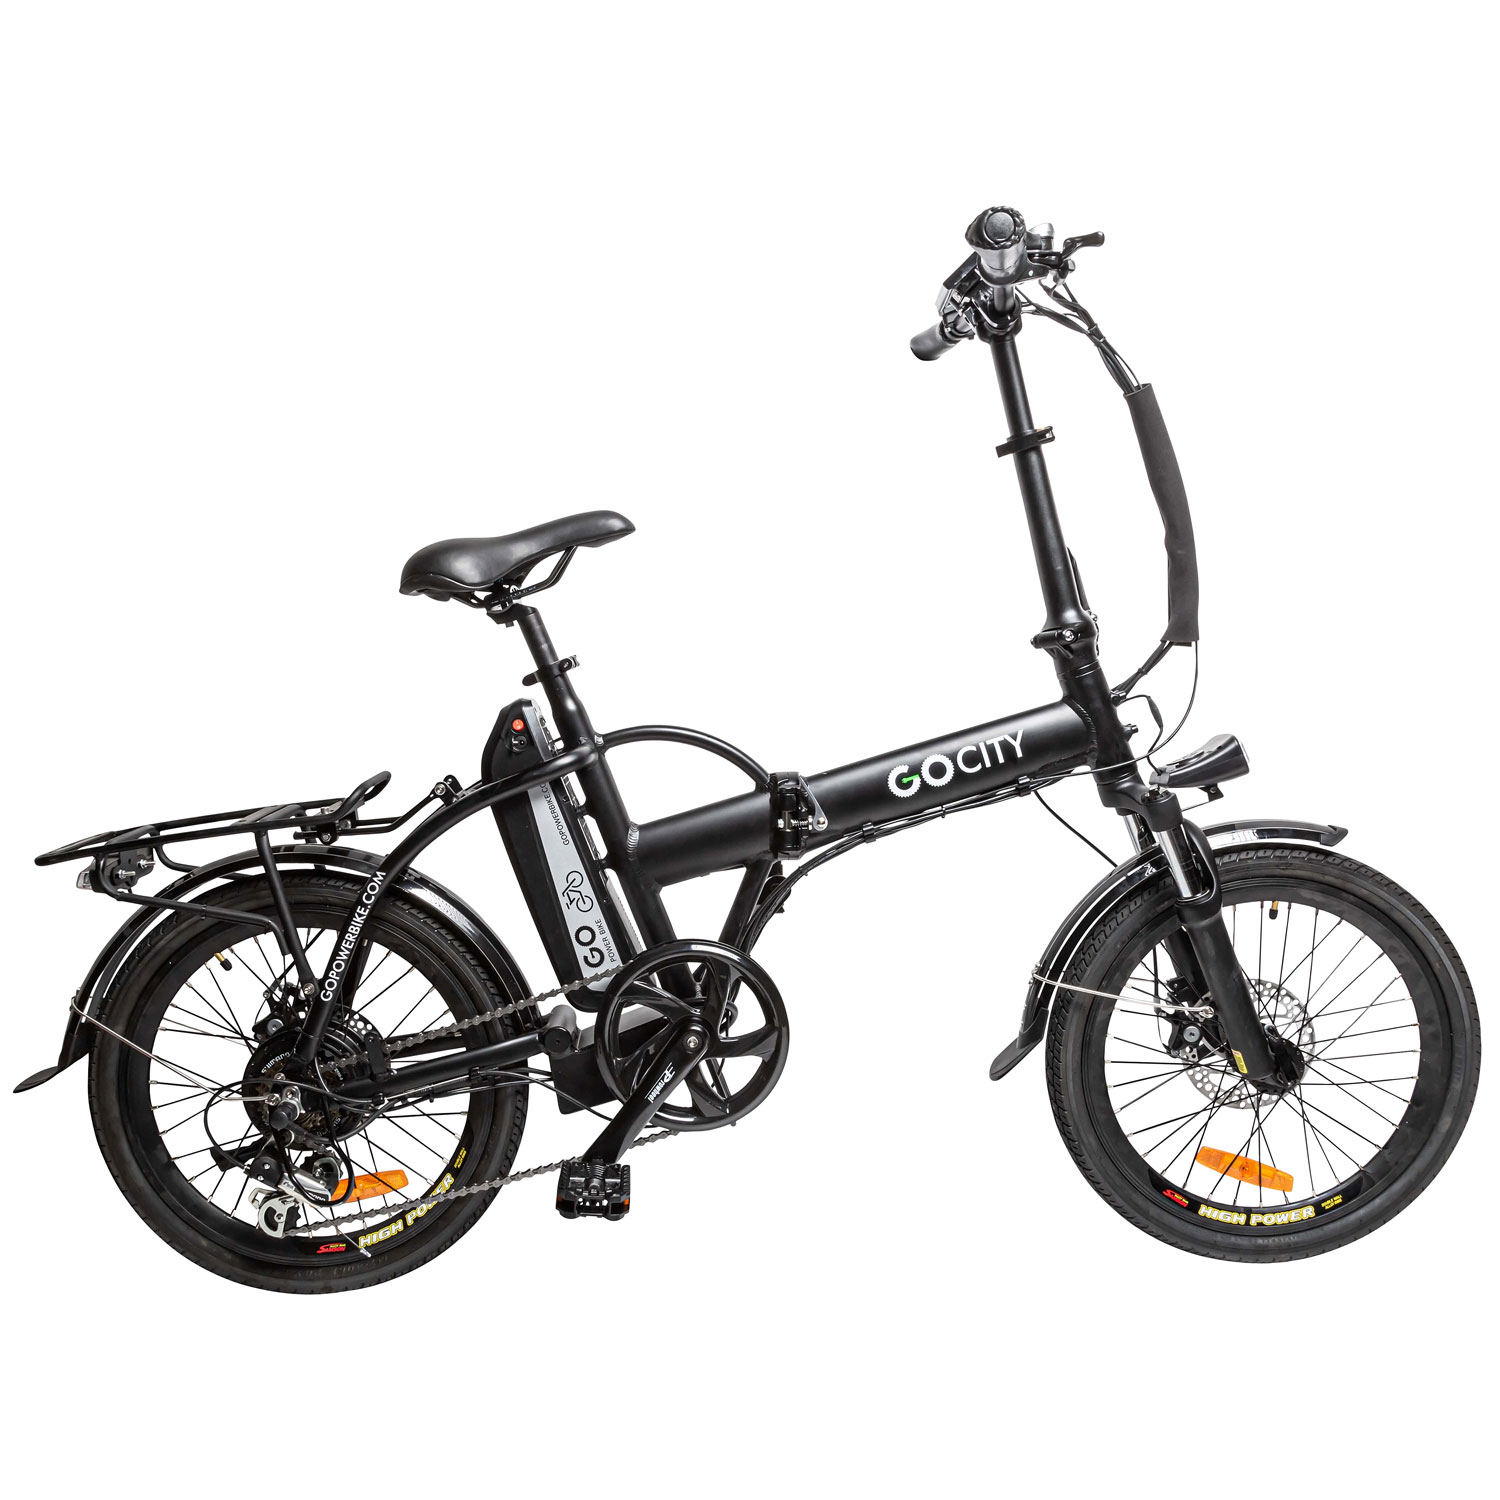 GO City Foldable 500W Electric City Bike with up to 58km Battery Life - Black